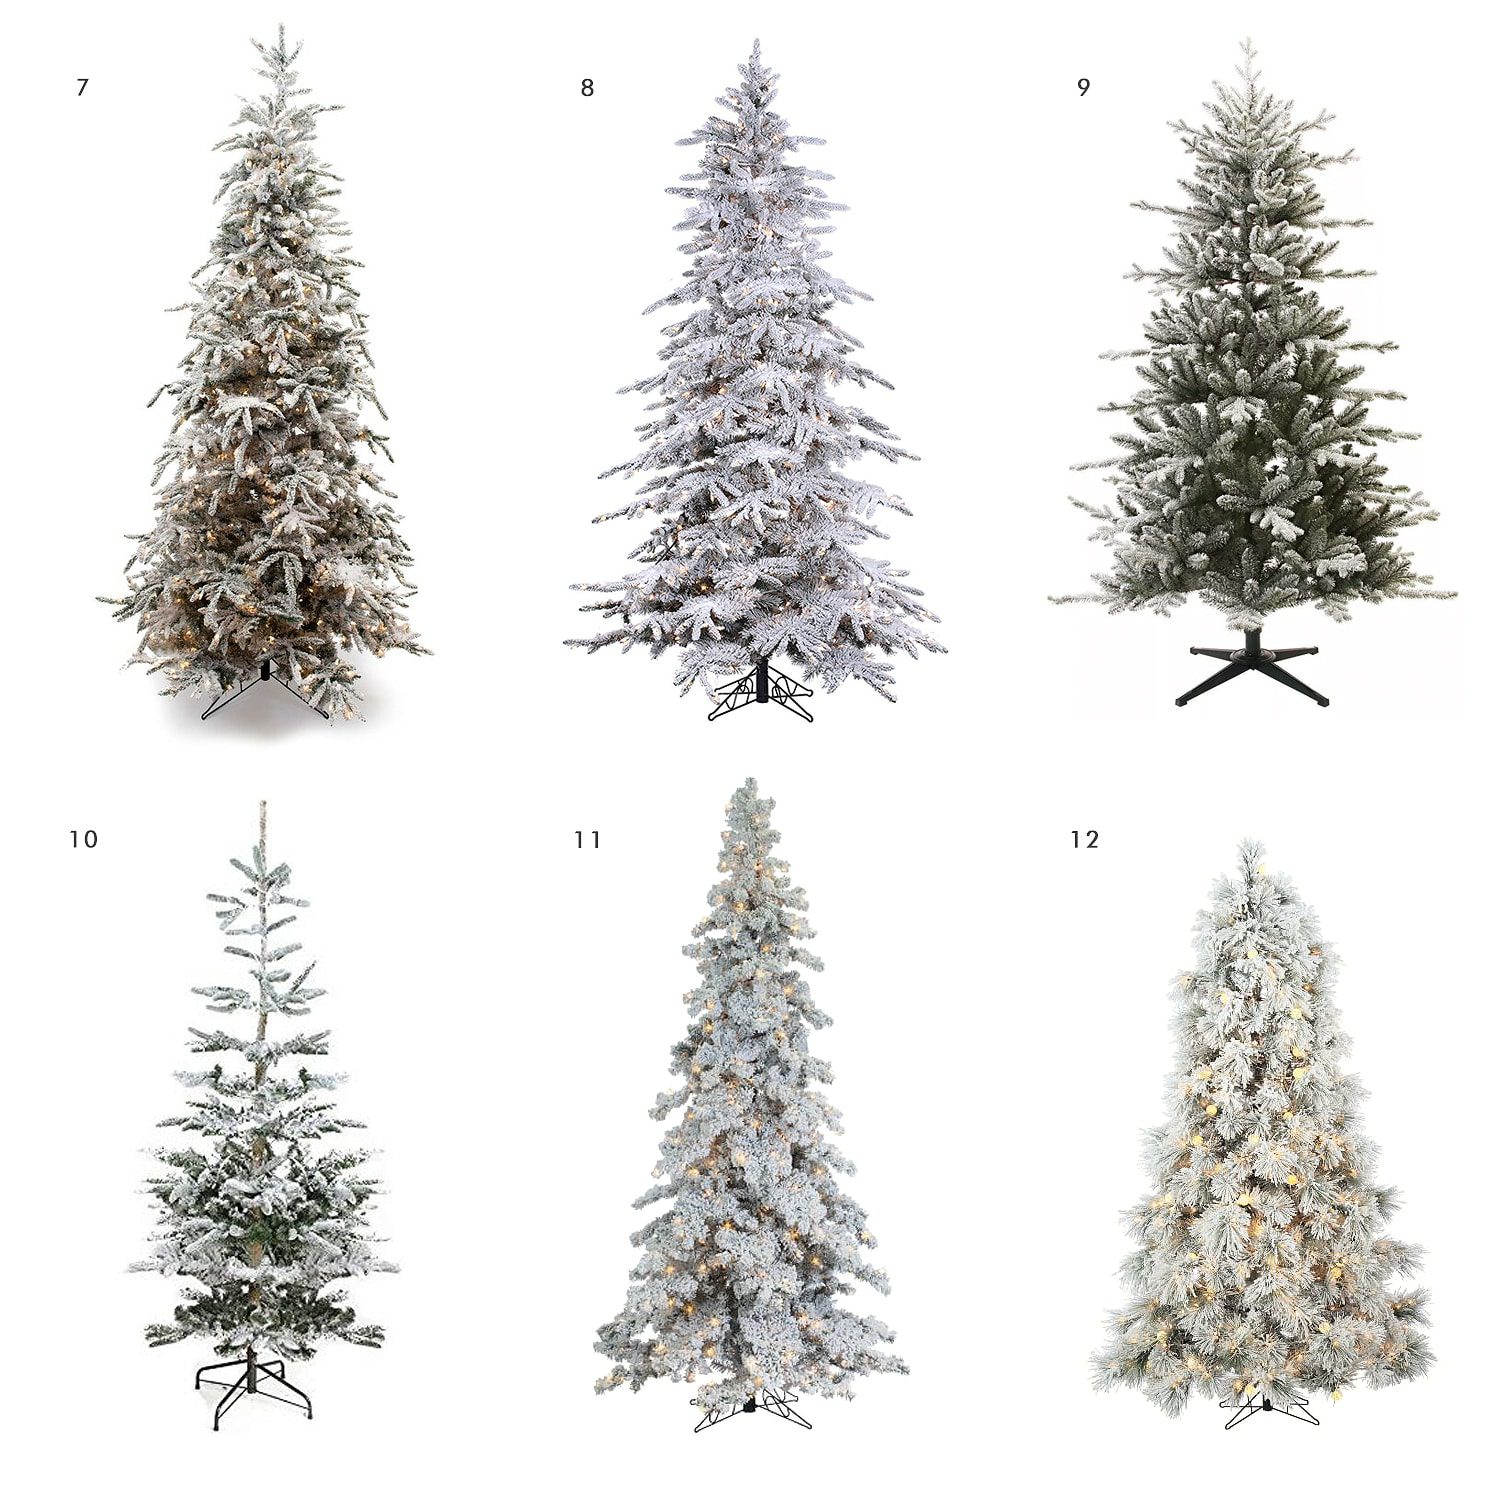  Round-up of full sized flocked Christmas trees | Flocked Christmas trees in every shape, size and price point | via Yellow Brick Home